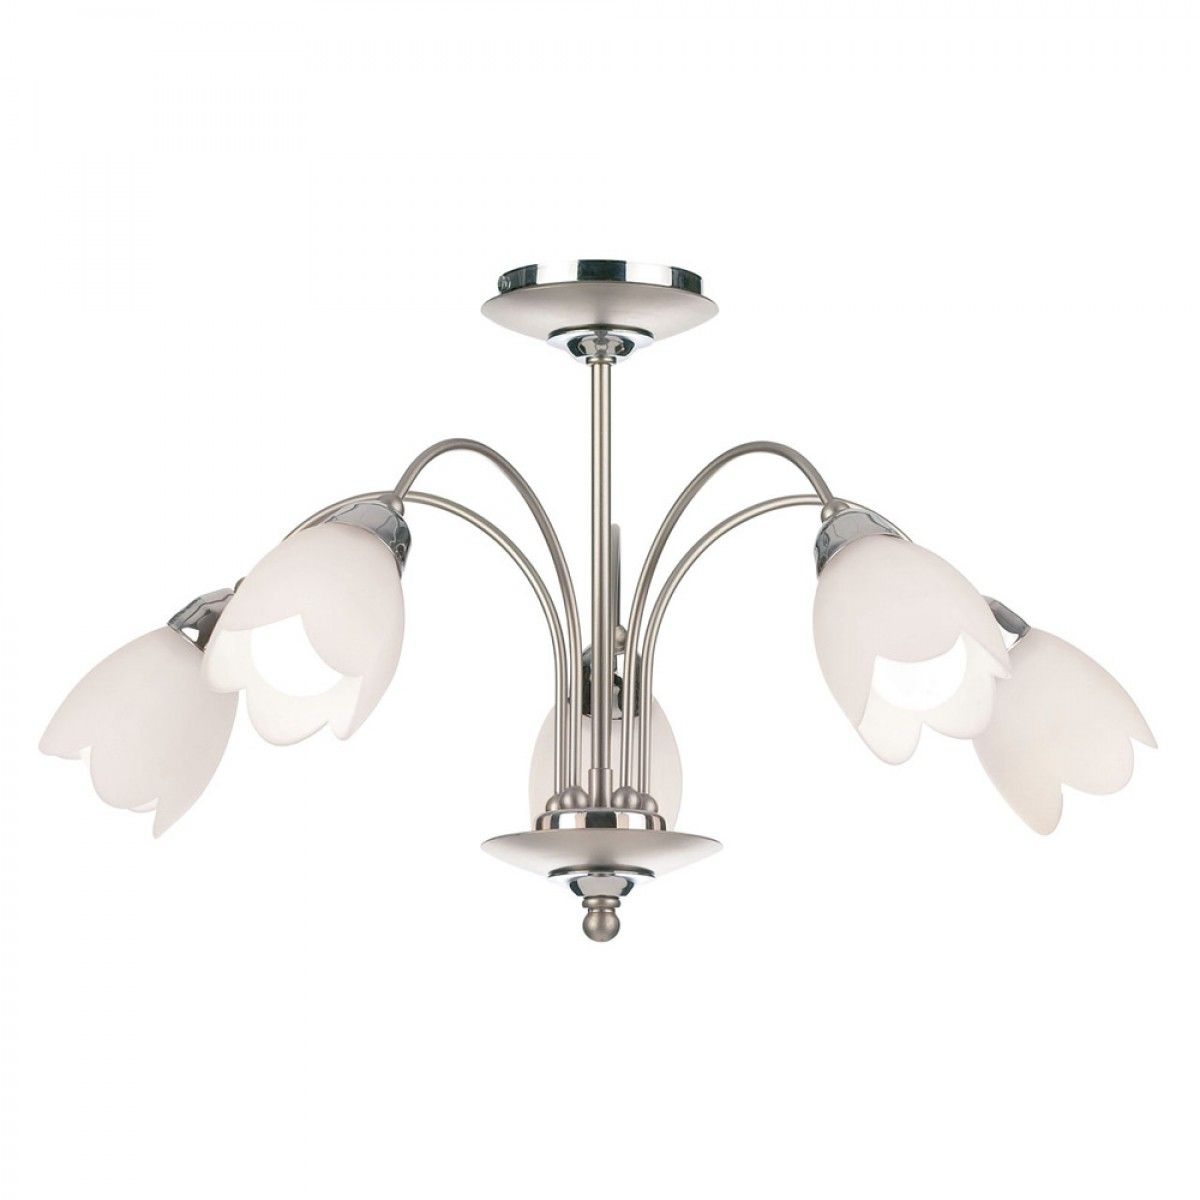 Ceiling Light With Matt White Tulip Shaped Glass Endon Lighting With Regard To Endon Lighting Chandeliers (View 16 of 25)